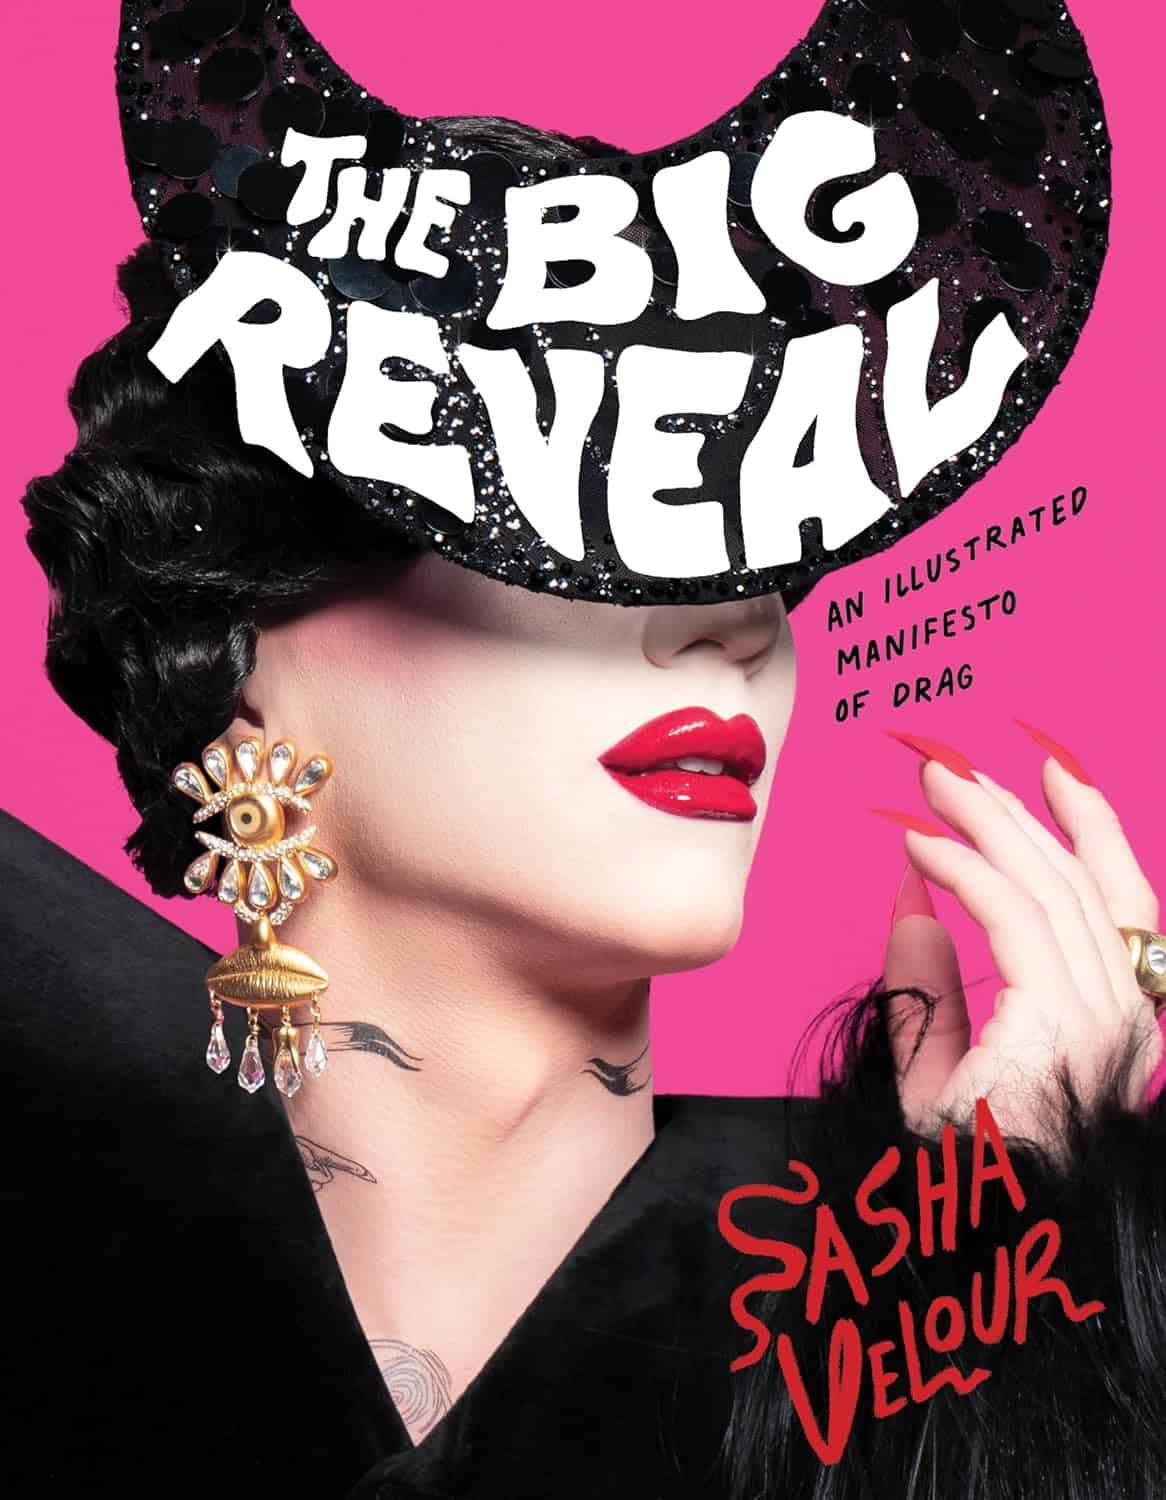 The Big Reveal An Illustrated Manifesto of Drag, by Sasha Velour